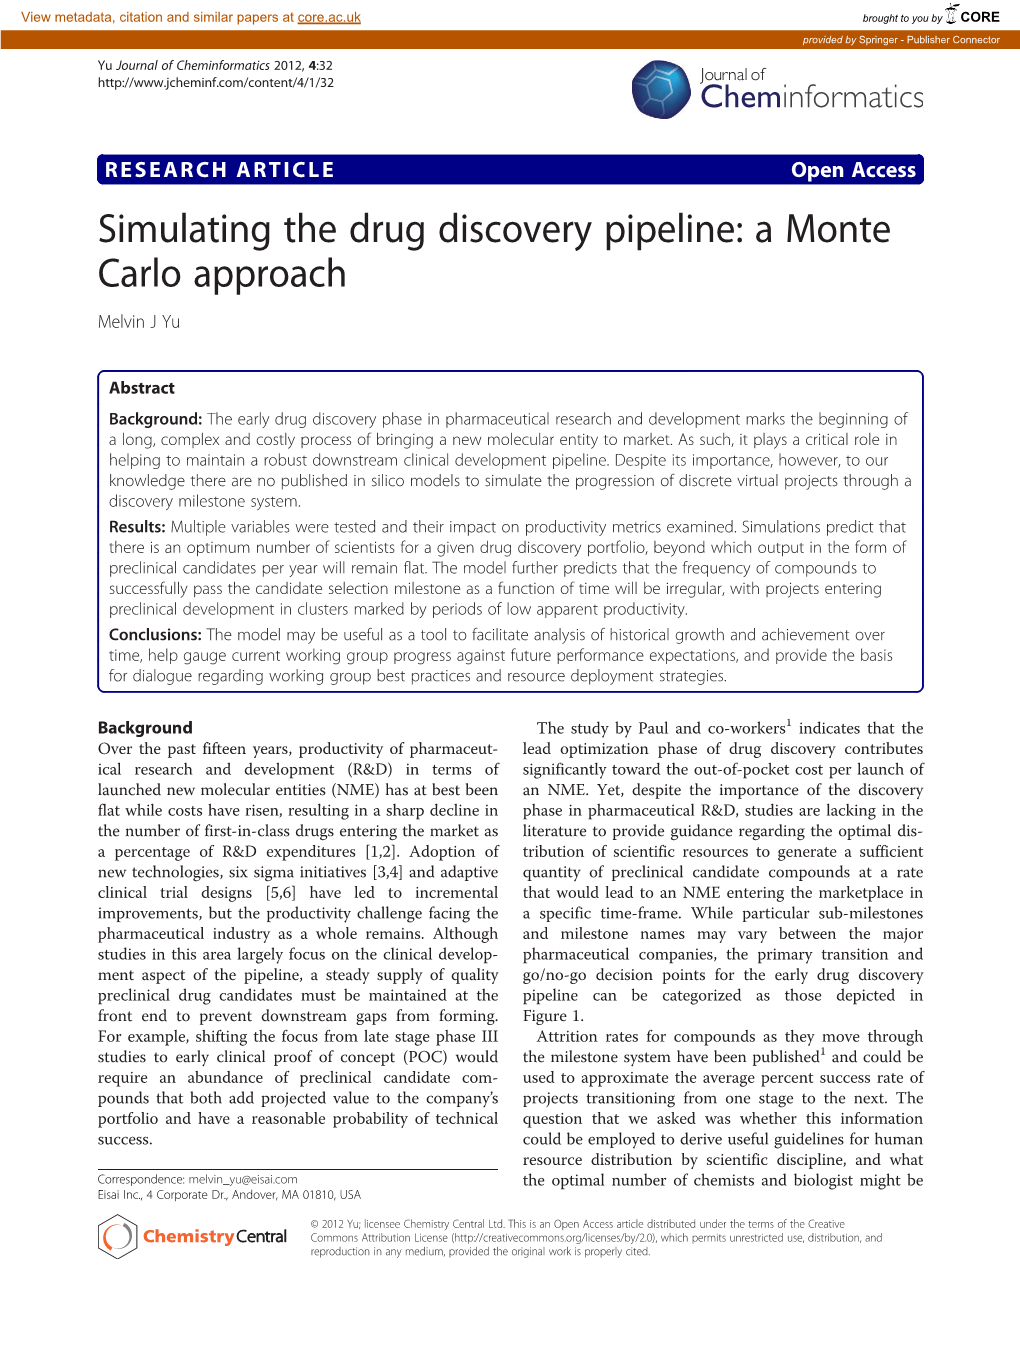 Simulating the Drug Discovery Pipeline: a Monte Carlo Approach Melvin J Yu